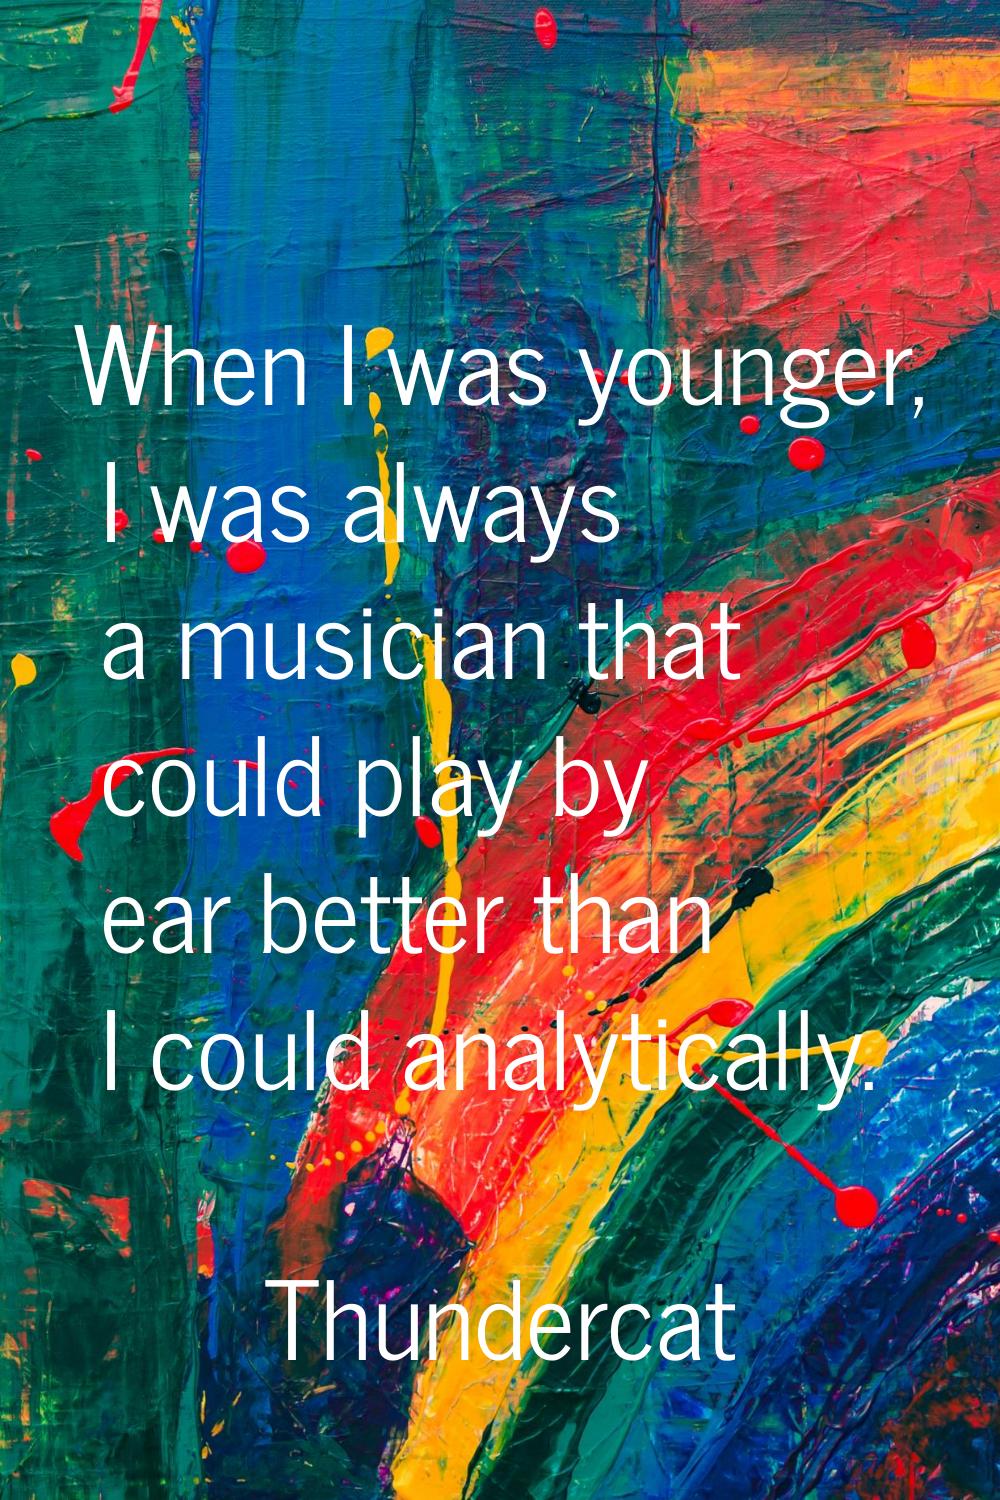 When I was younger, I was always a musician that could play by ear better than I could analytically